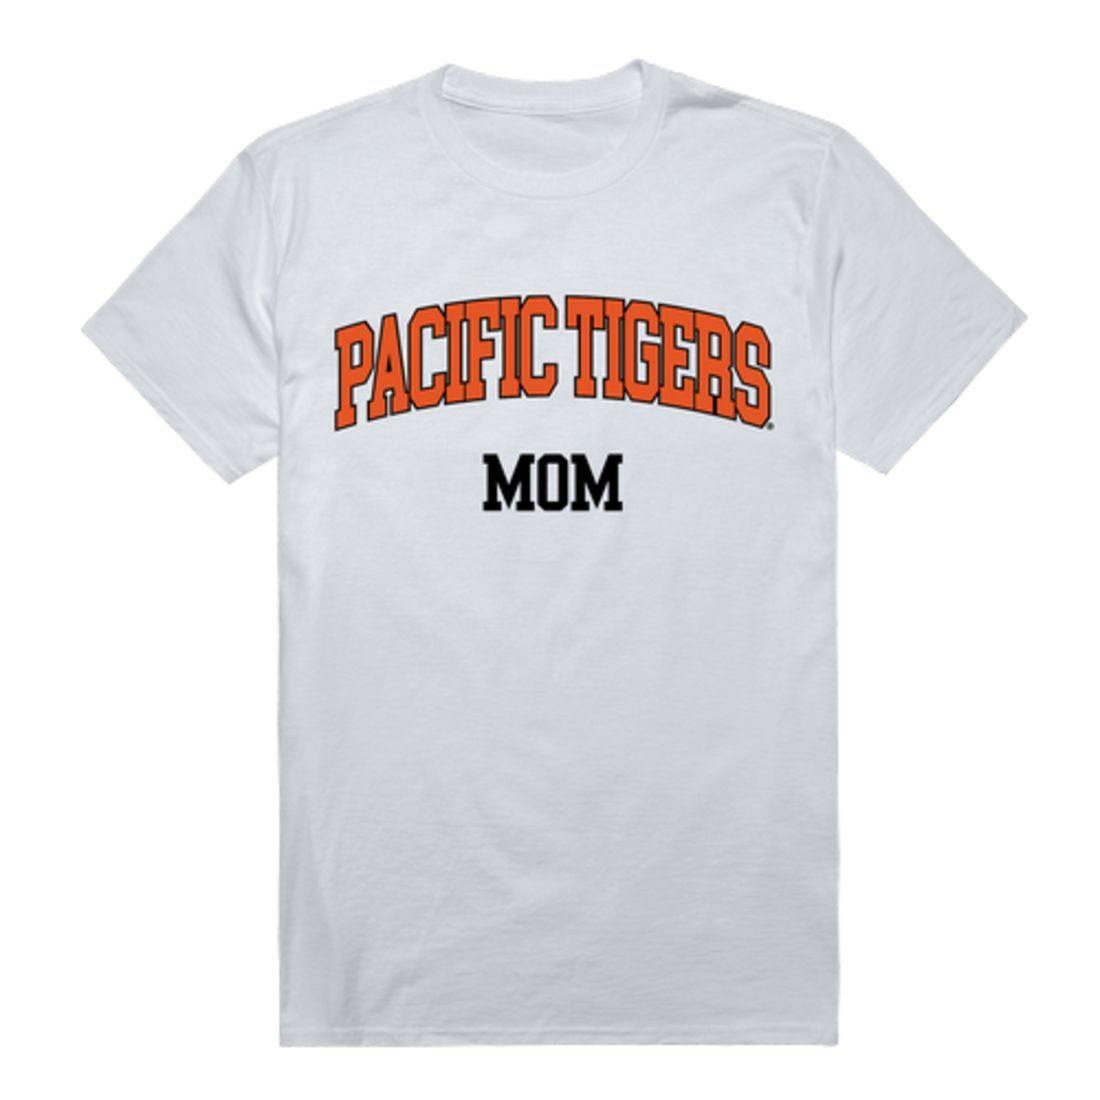 University of the Pacific Tigers College Mom Womens T-Shirt-Campus-Wardrobe